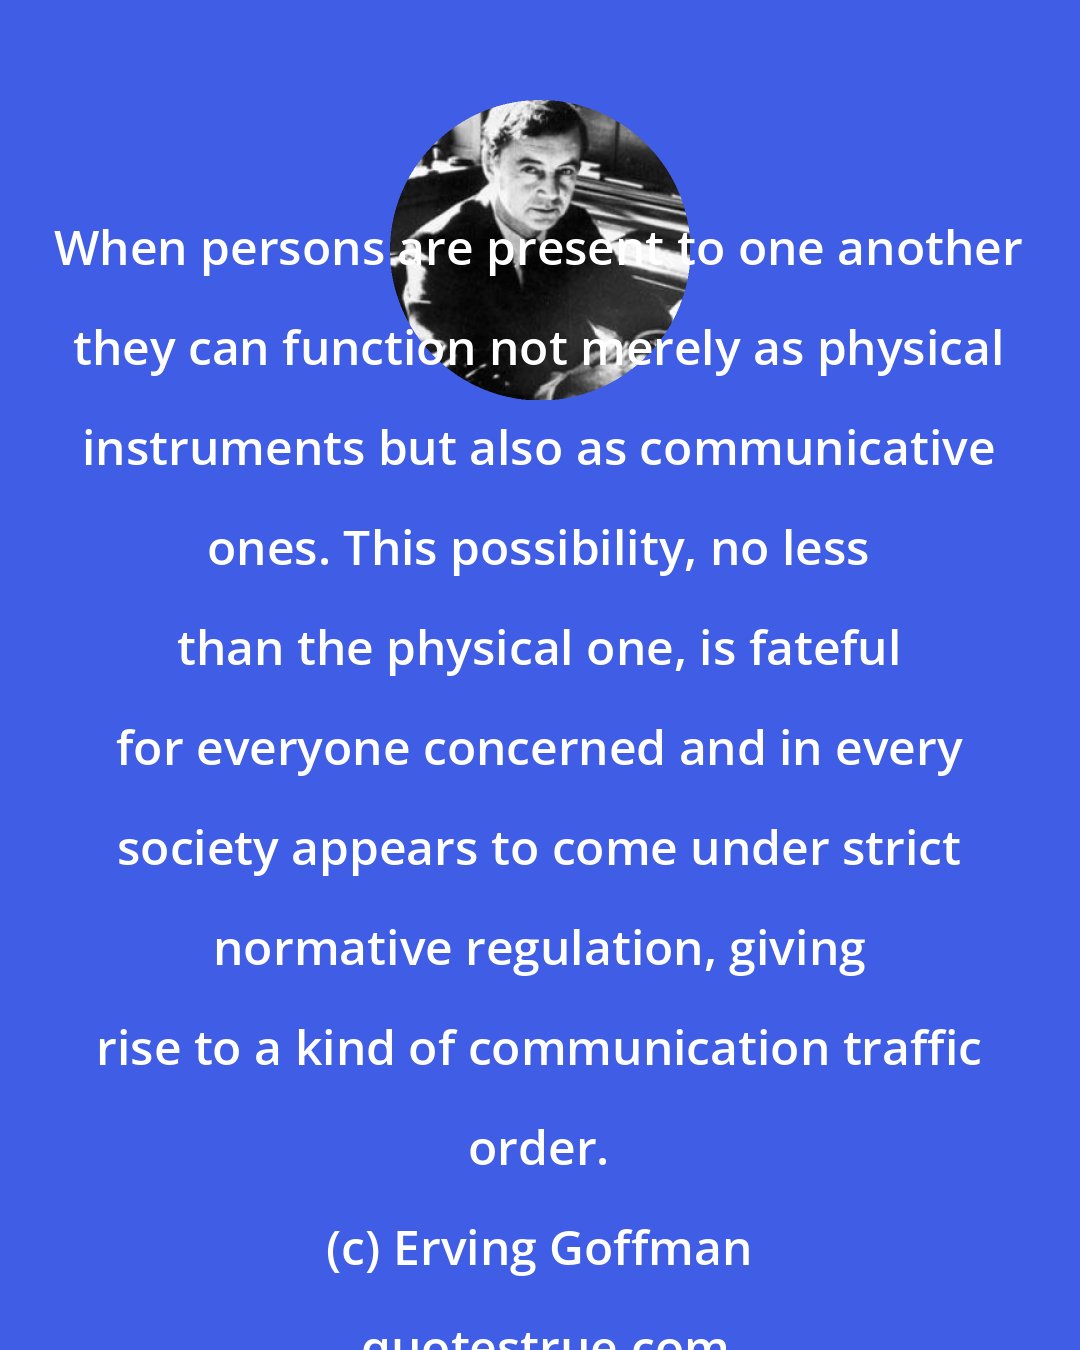 Erving Goffman: When persons are present to one another they can function not merely as physical instruments but also as communicative ones. This possibility, no less than the physical one, is fateful for everyone concerned and in every society appears to come under strict normative regulation, giving rise to a kind of communication traffic order.